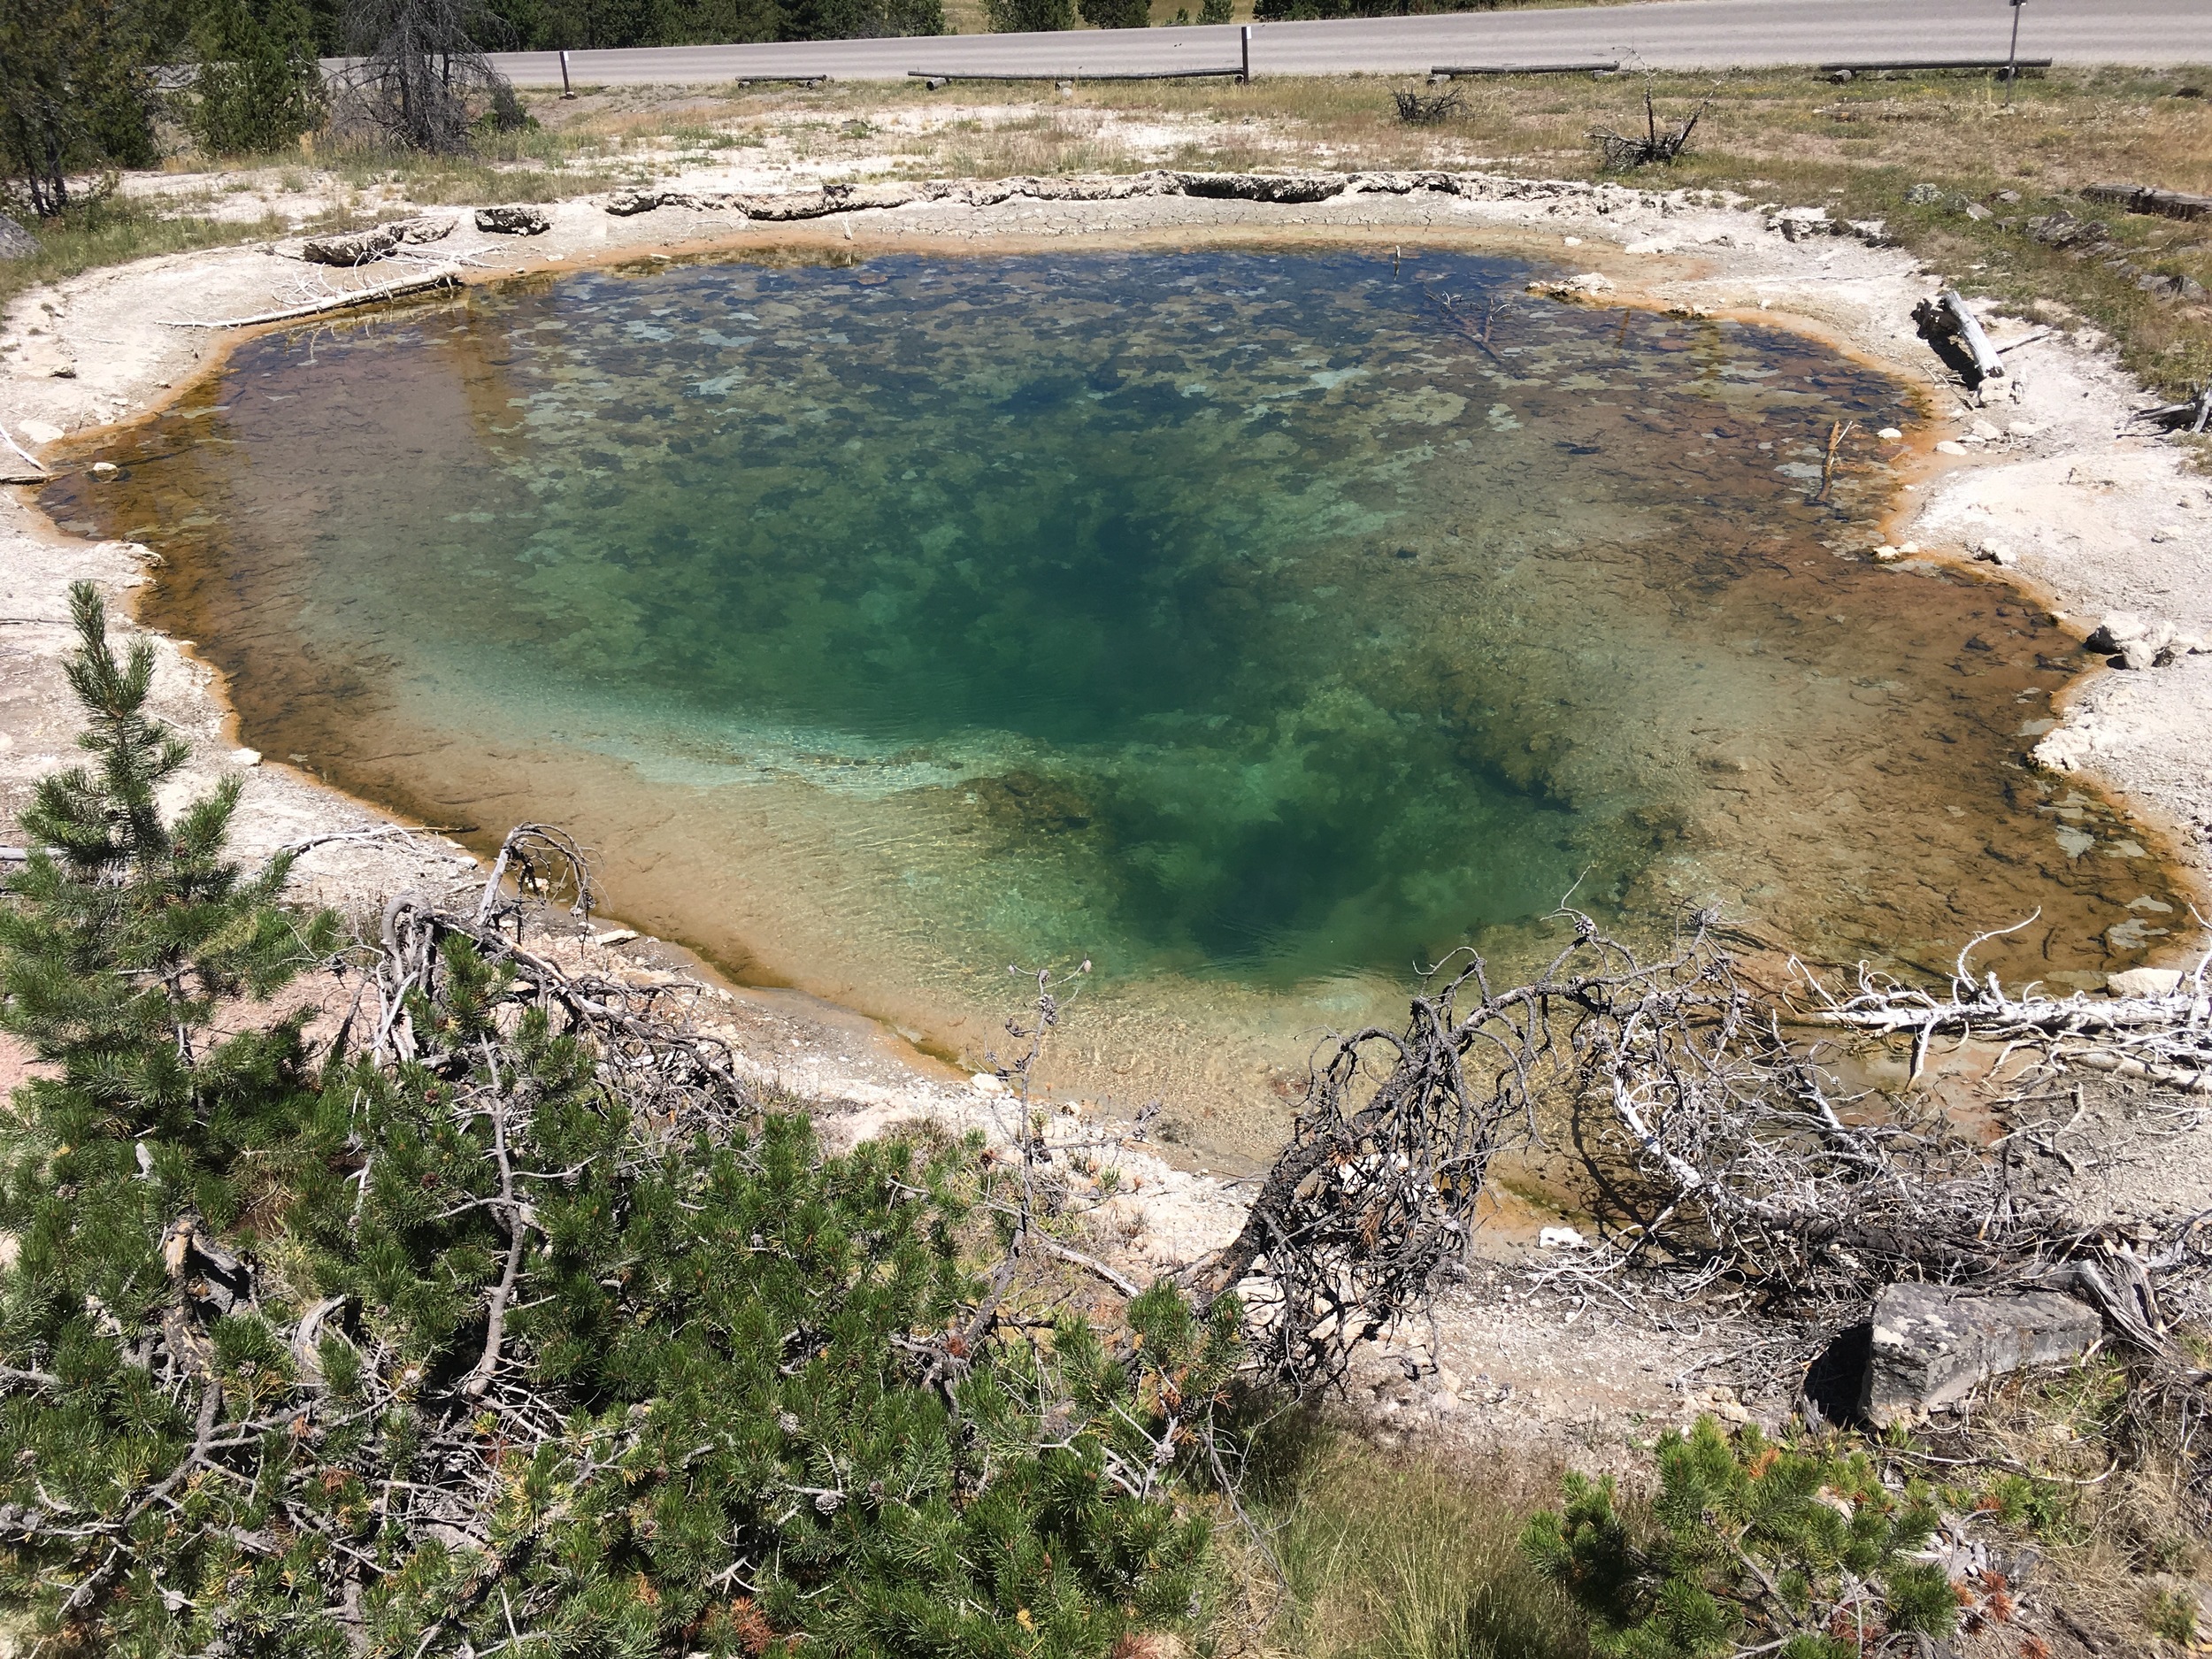 Lower Geyser Basin, showing emerald color, in contrast to the turquoise of the other pools